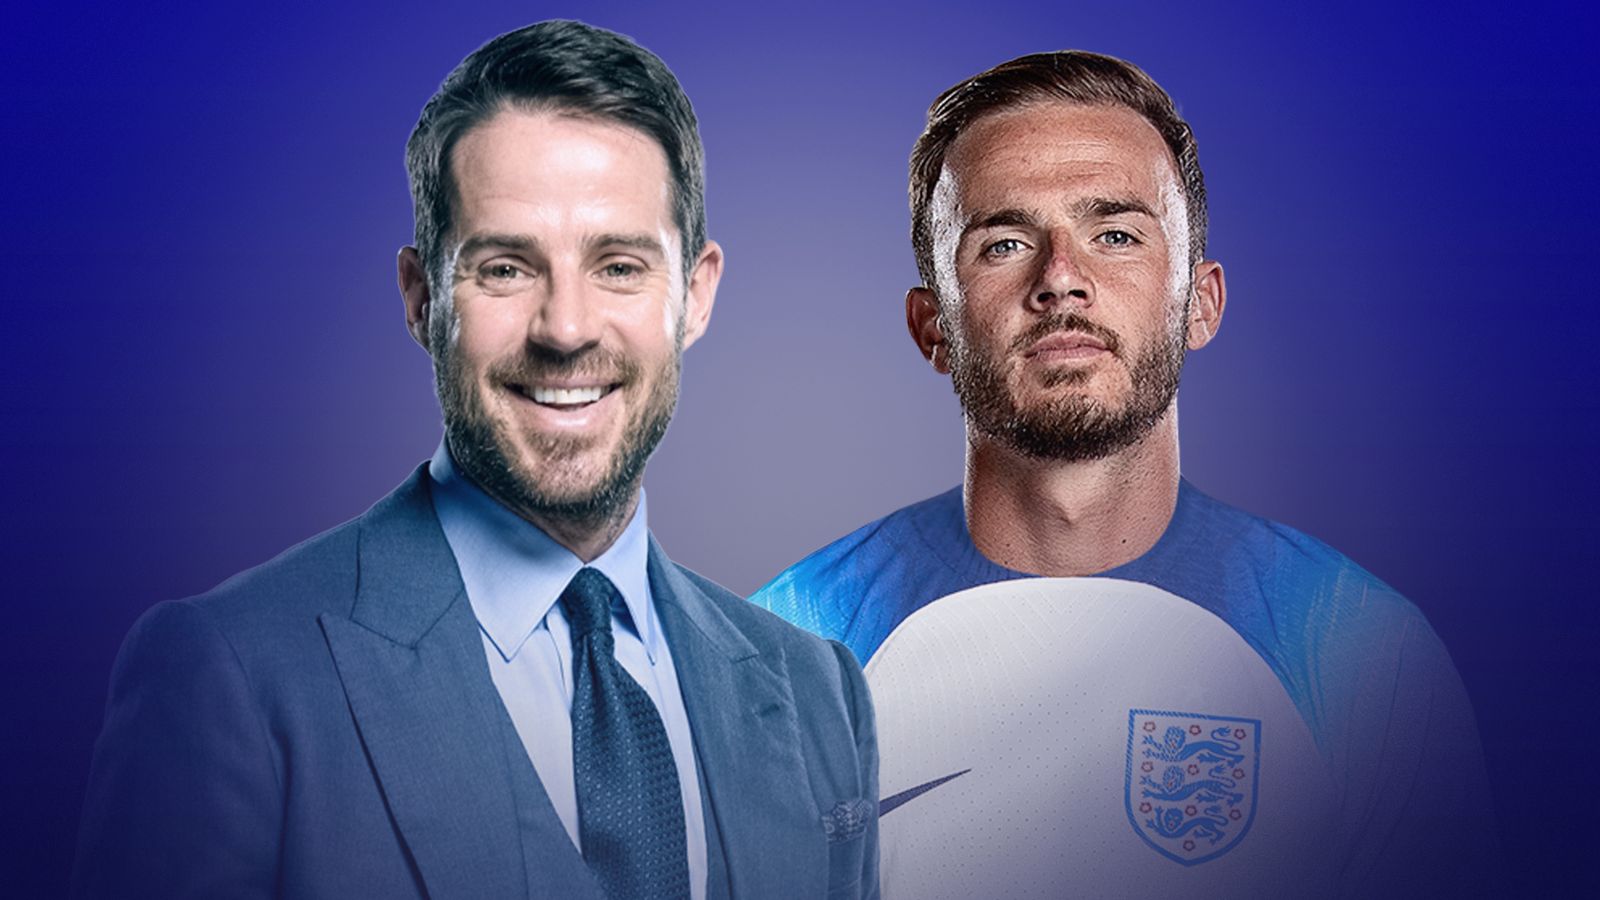 Jamie Redknapp says James Maddison too good to ignore for England's World Cup sq..